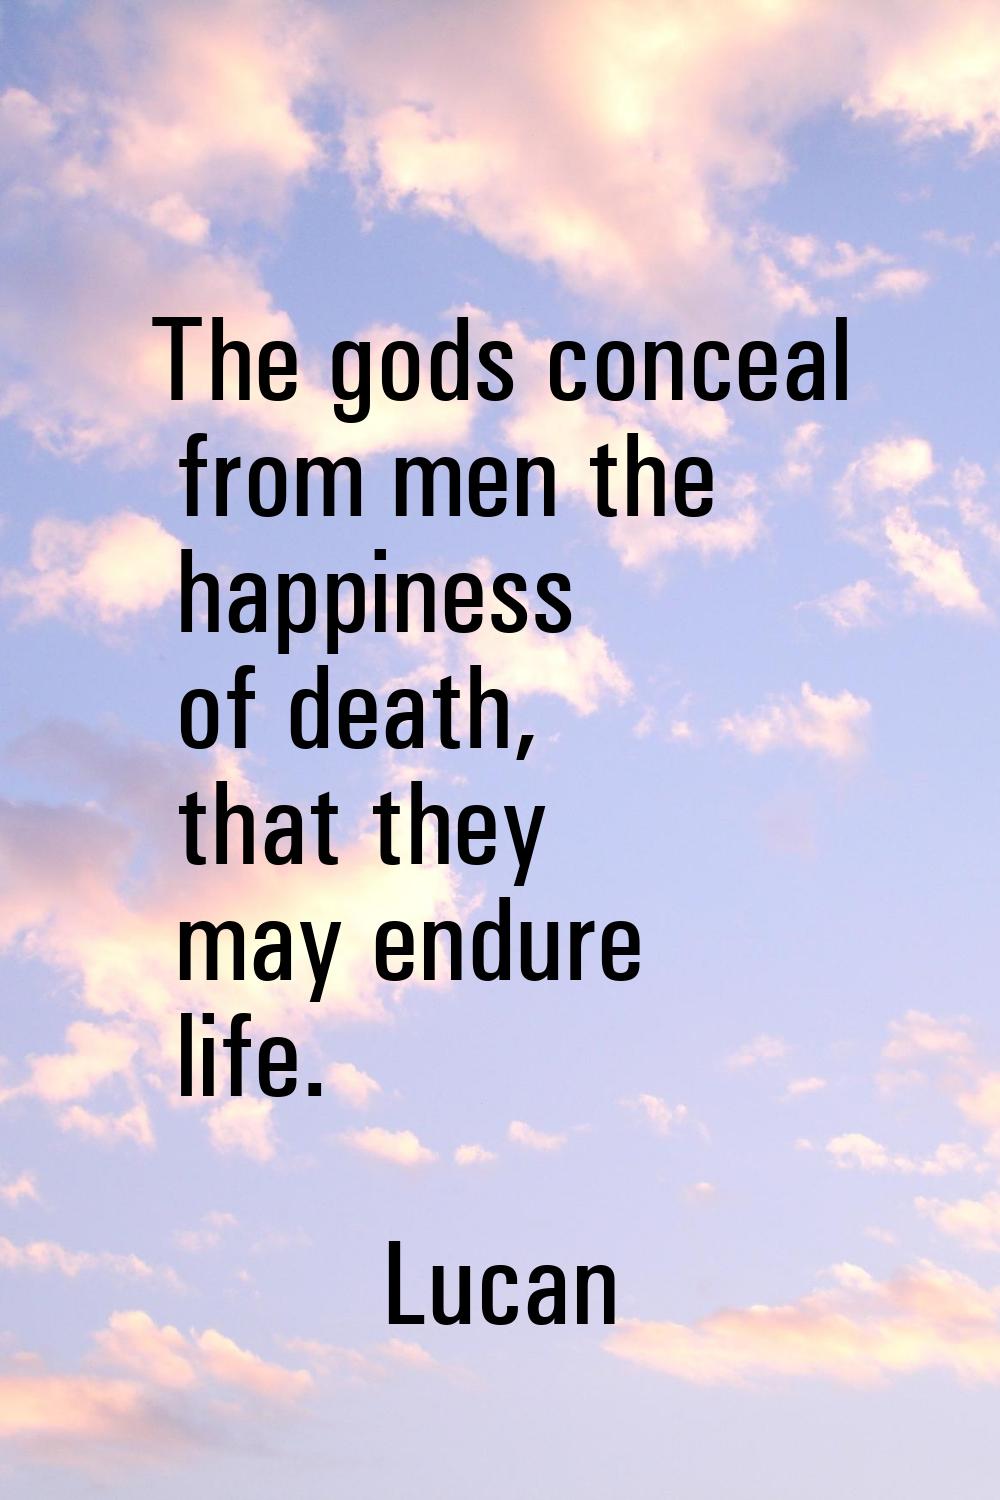 The gods conceal from men the happiness of death, that they may endure life.